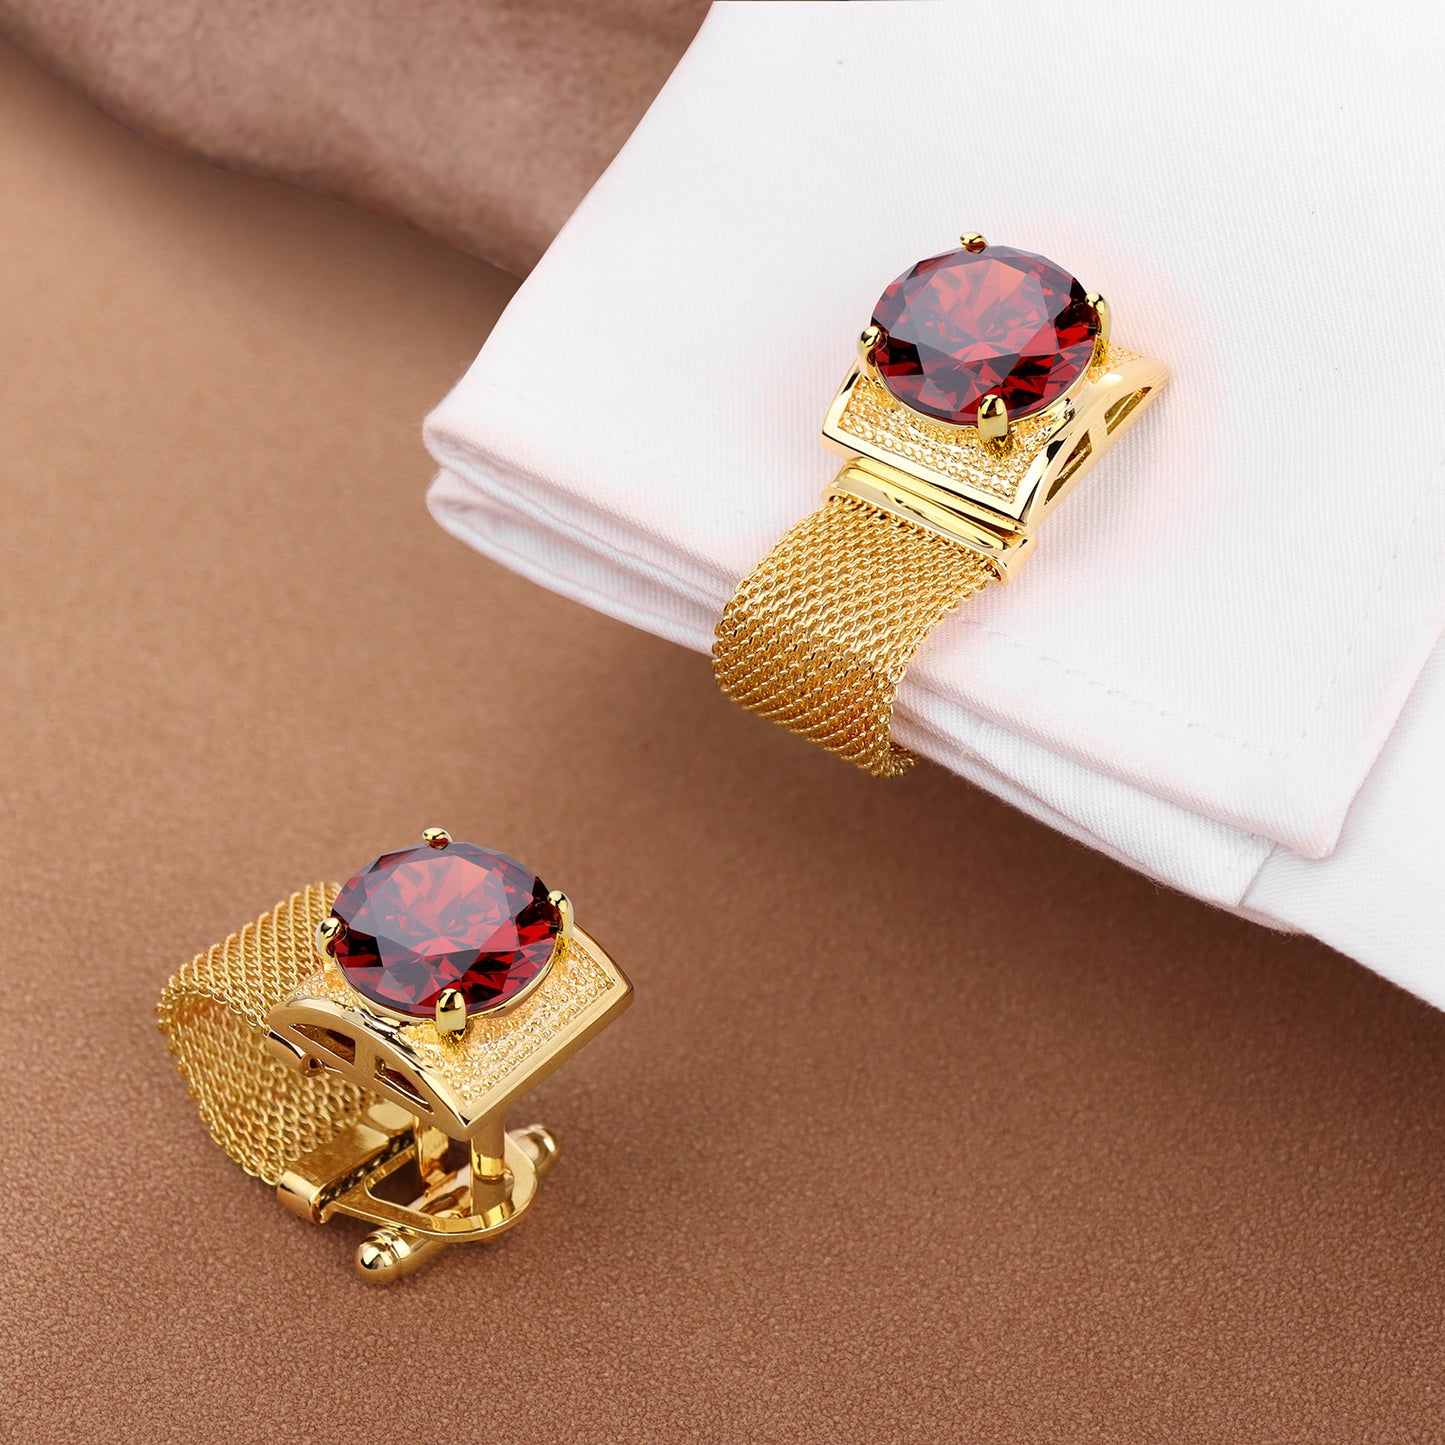 Cufflinks for Men with Chain - Birthstone and Shiny Gold Tone Shirt Accessories - Birthday Christmas Gifts for Men.